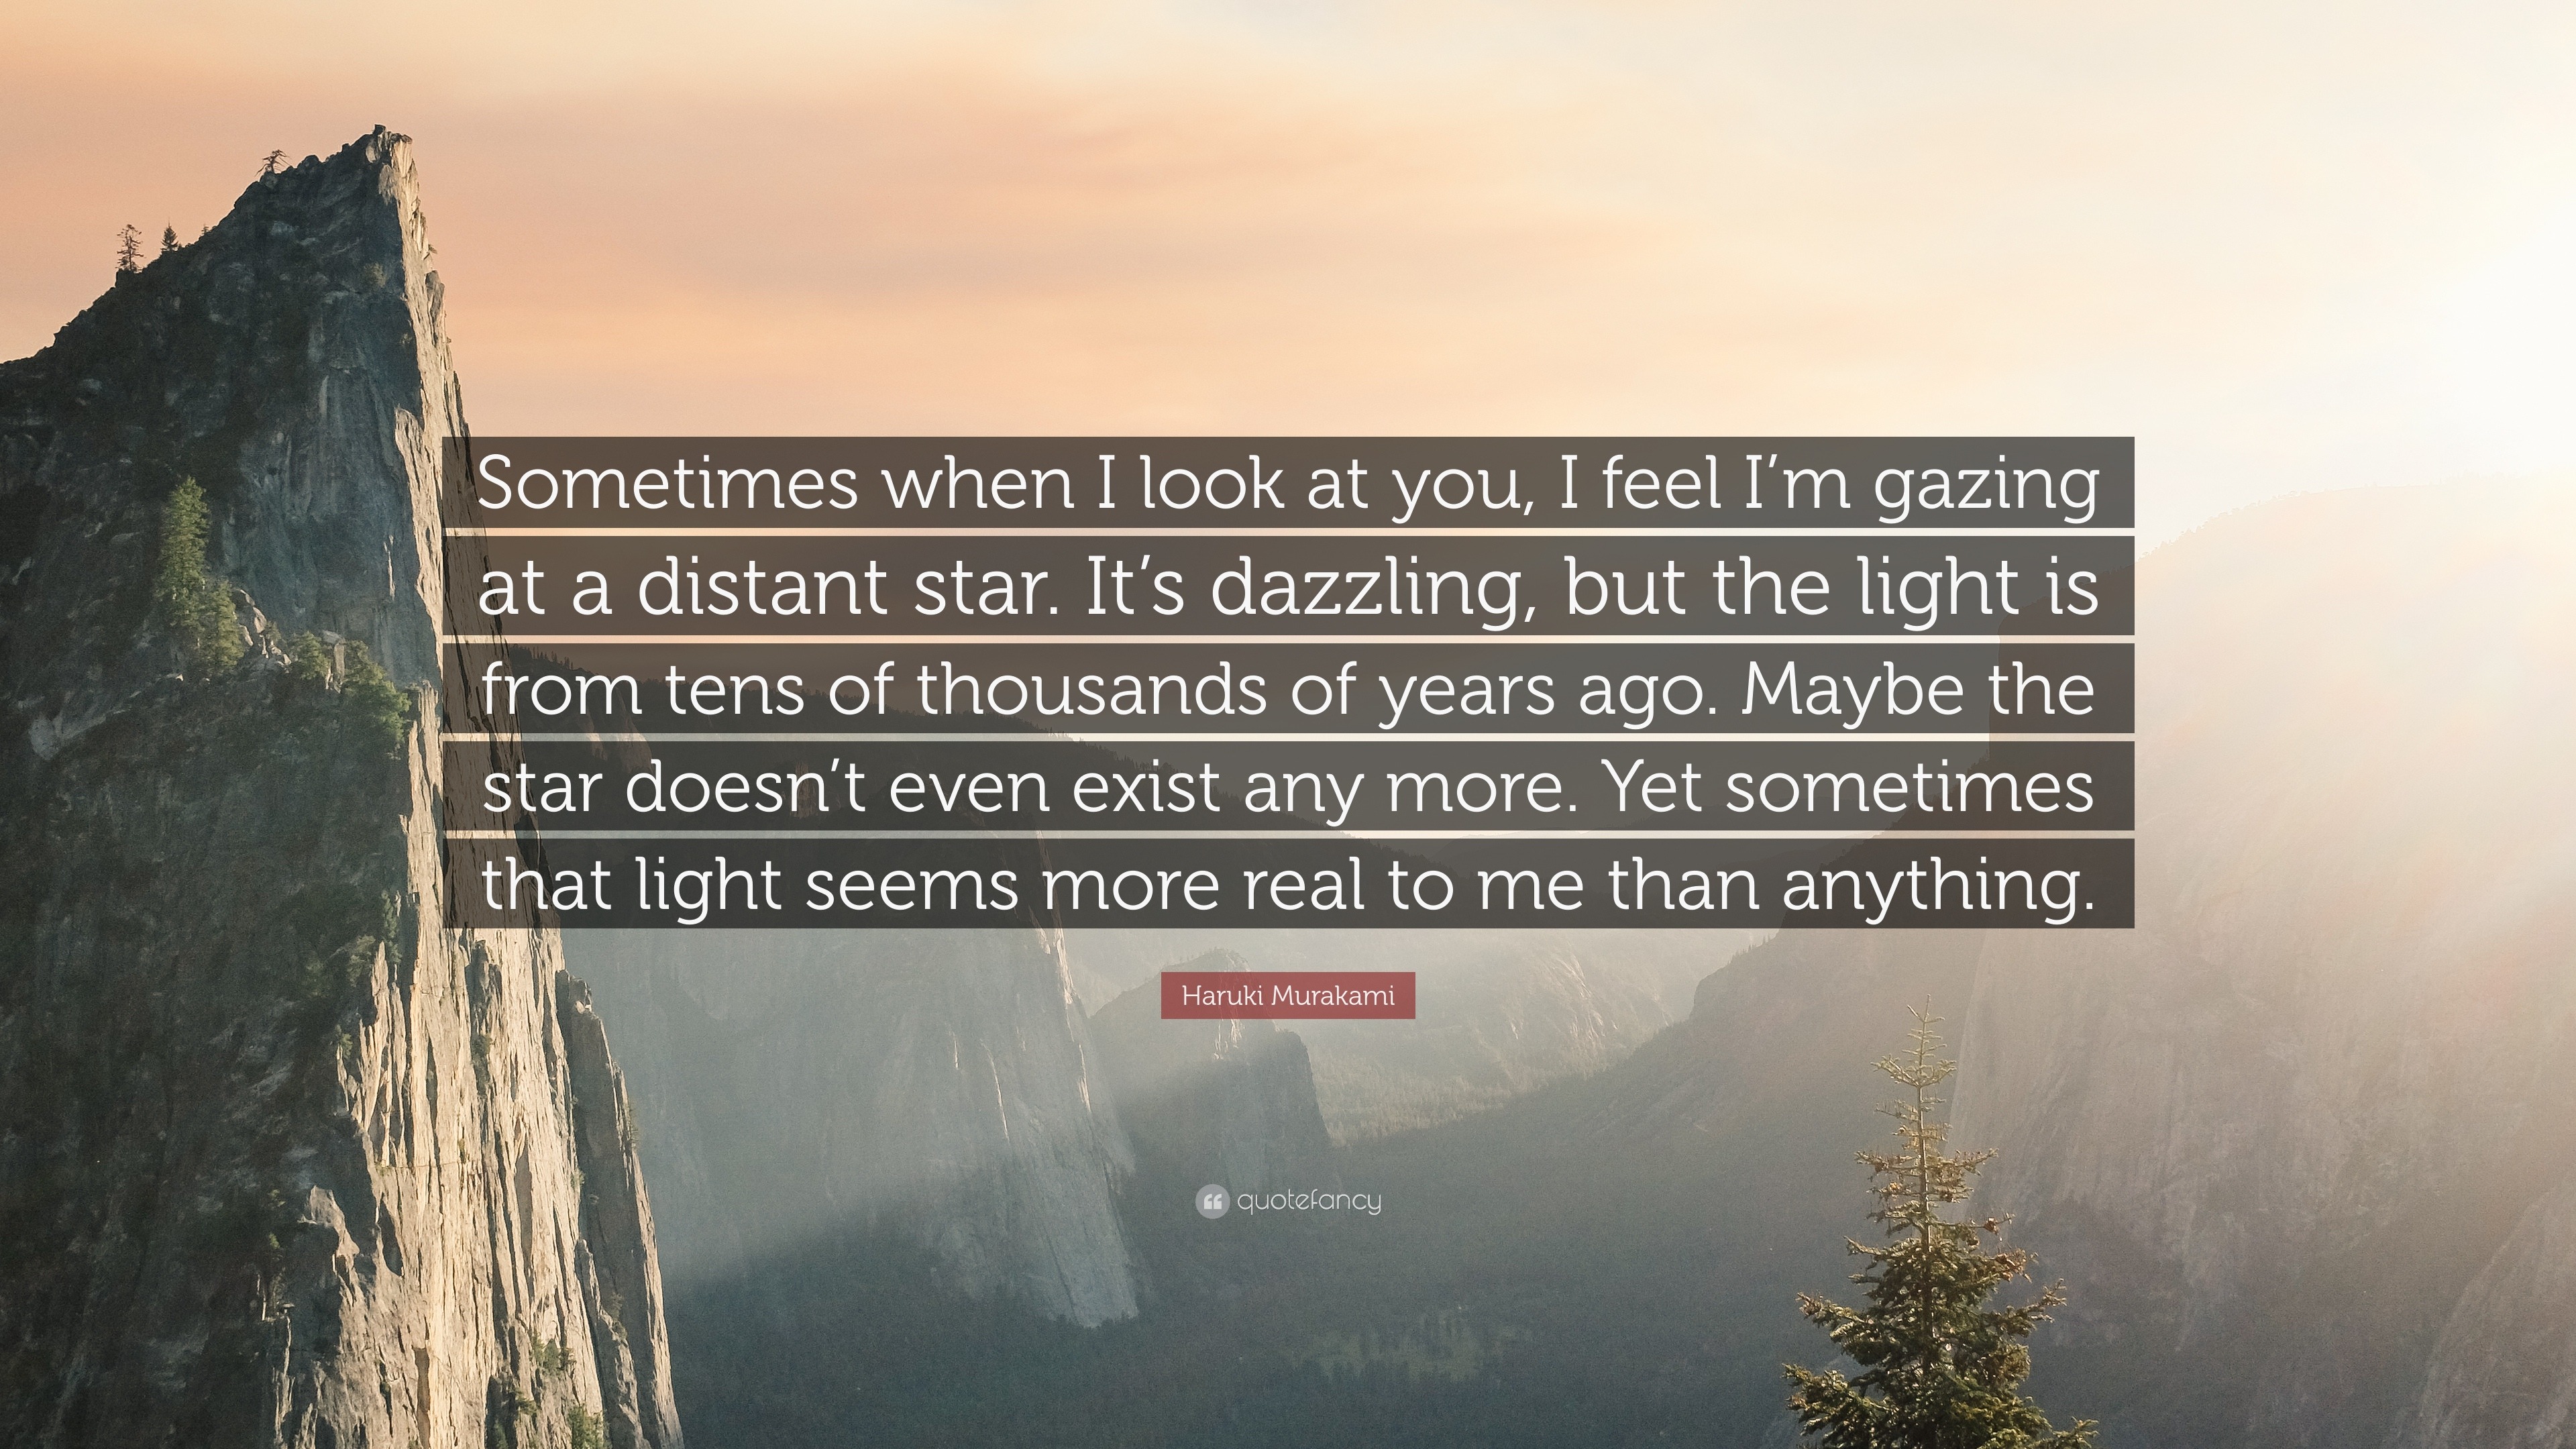 Haruki Murakami Quote: “Sometimes When I Look At You, I Feel I'm Gazing At A Distant Star. It's Dazzling, But The Light Is From Tens Of Thousand...”